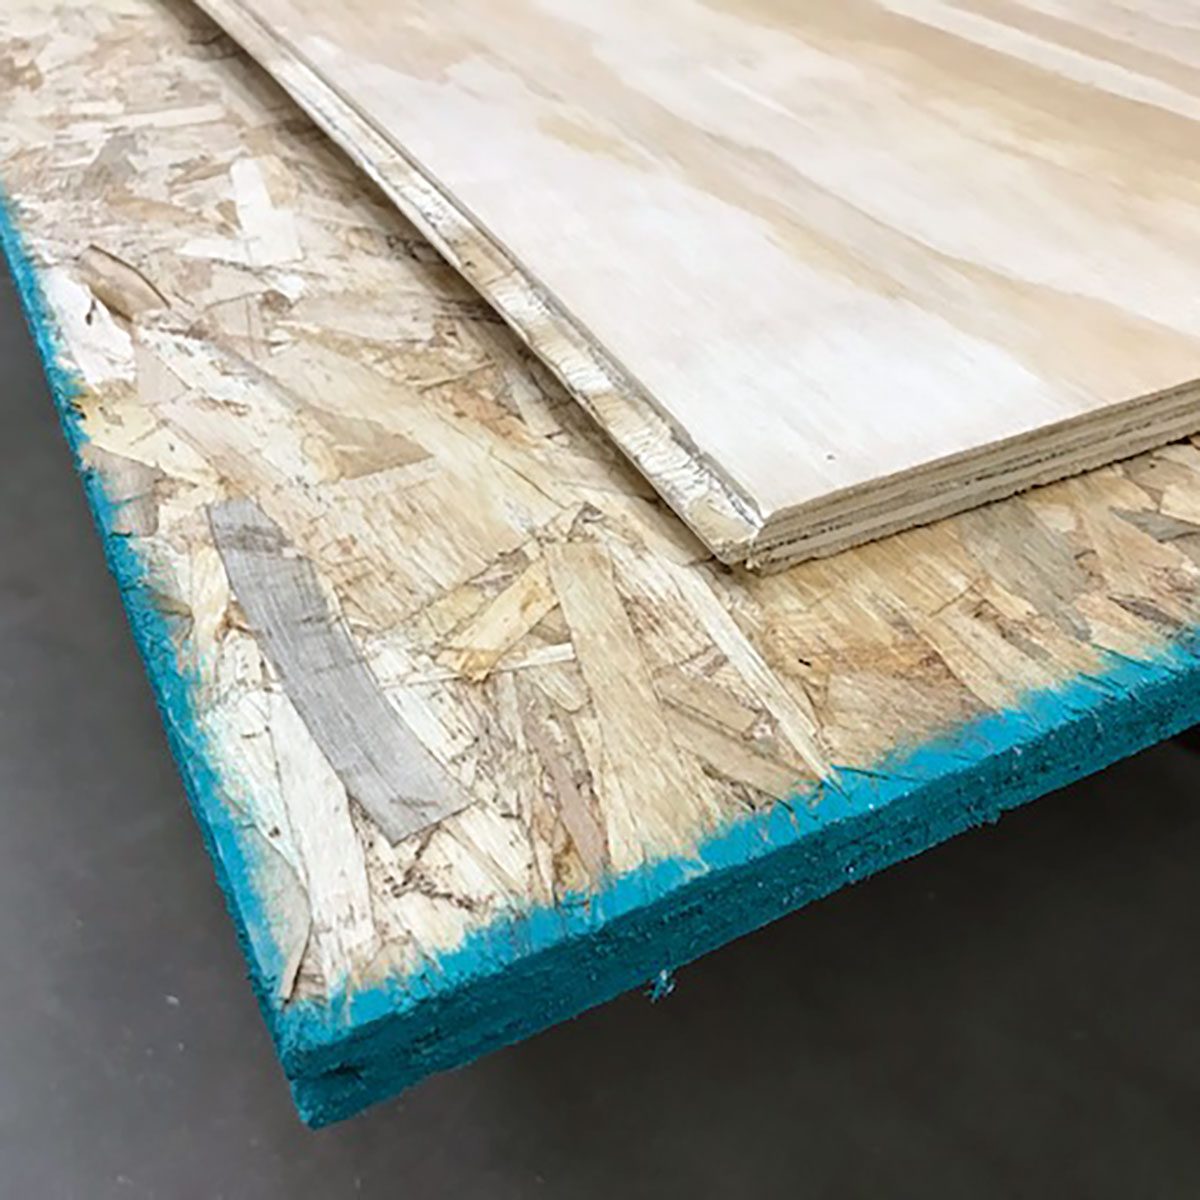 Plywood vs. OSB: Which Is Better? | Family Handyman